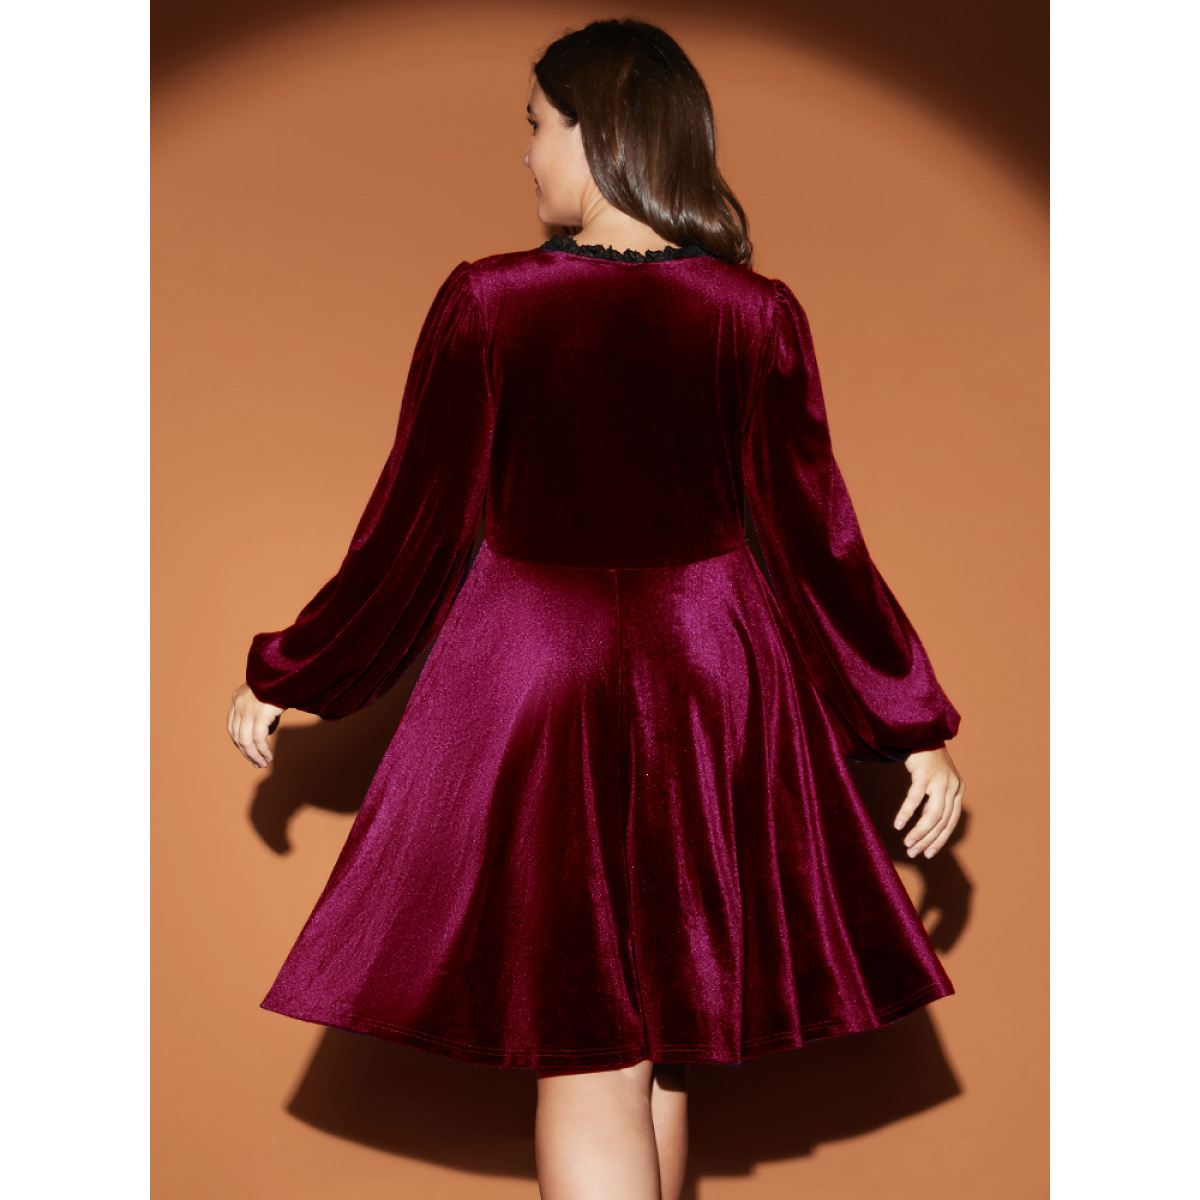 

Solid Party High Waist Vintage Plus Size Women Knee Dress Going out Plain Pocket Moderately Stretchy Lantern Sleeve Long Sleeve V Neck Glamour Dresses BloomChic, Burgundy